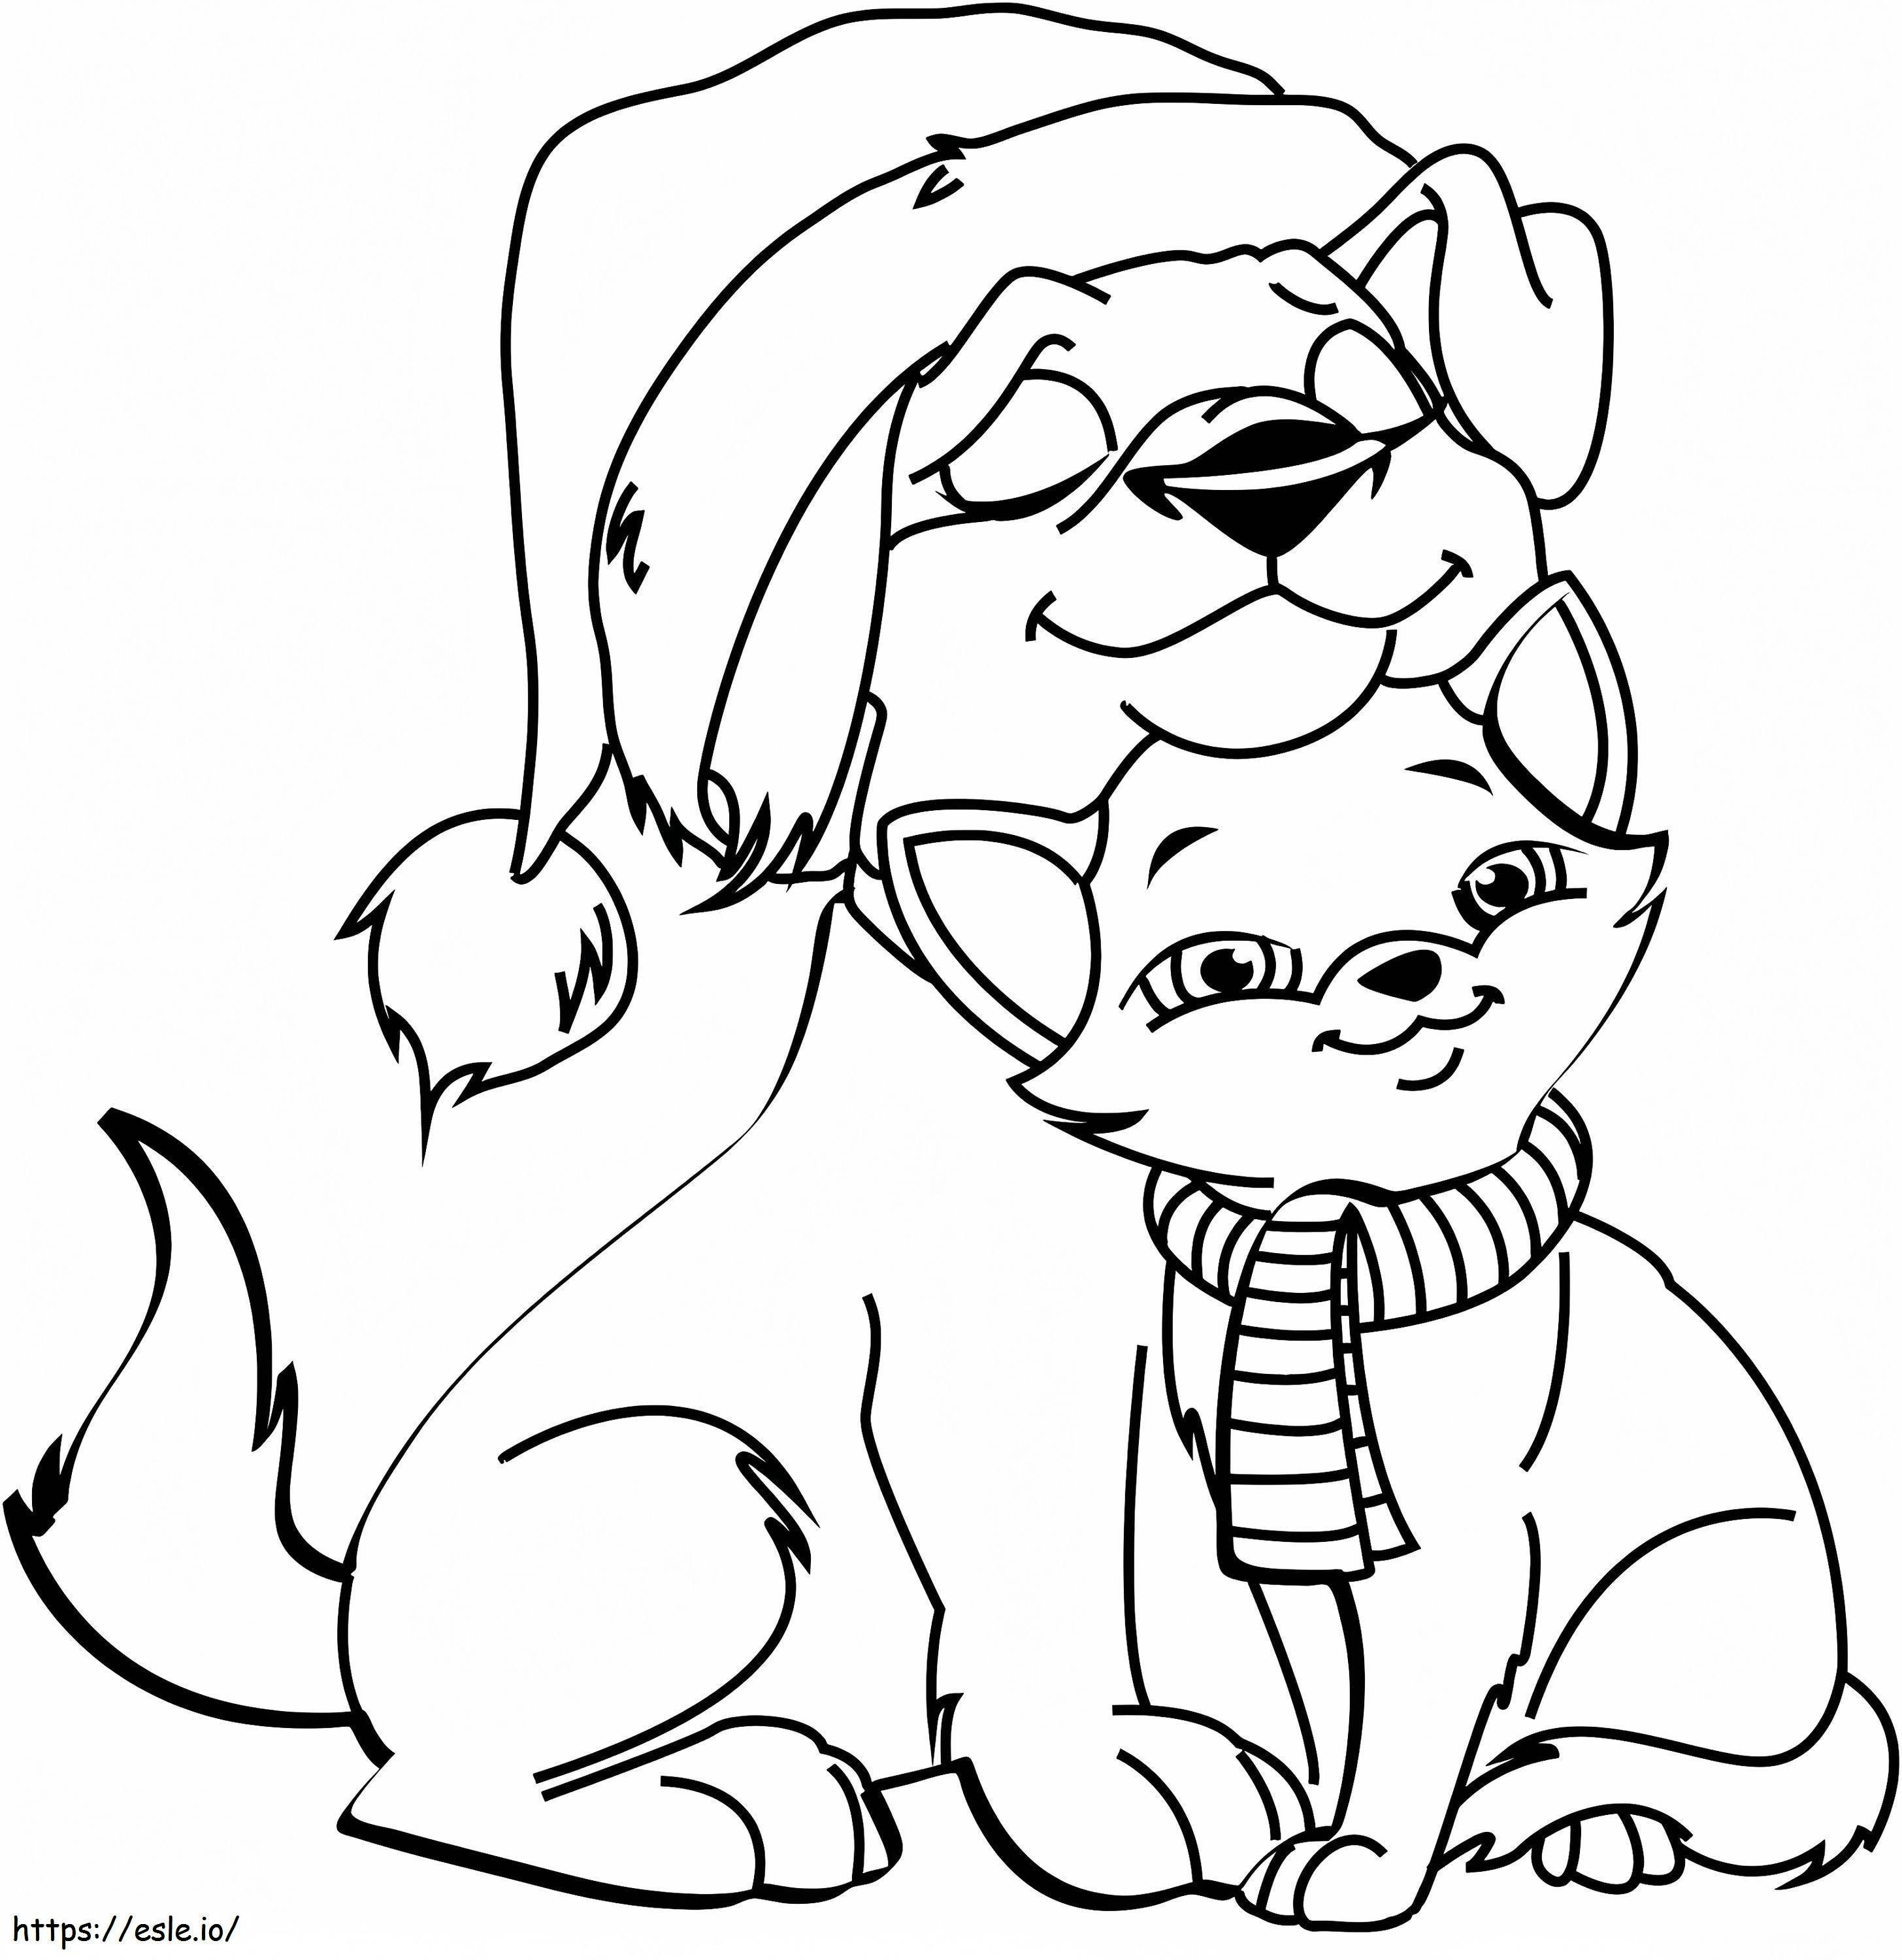 Dog And Cat Free Printable coloring page